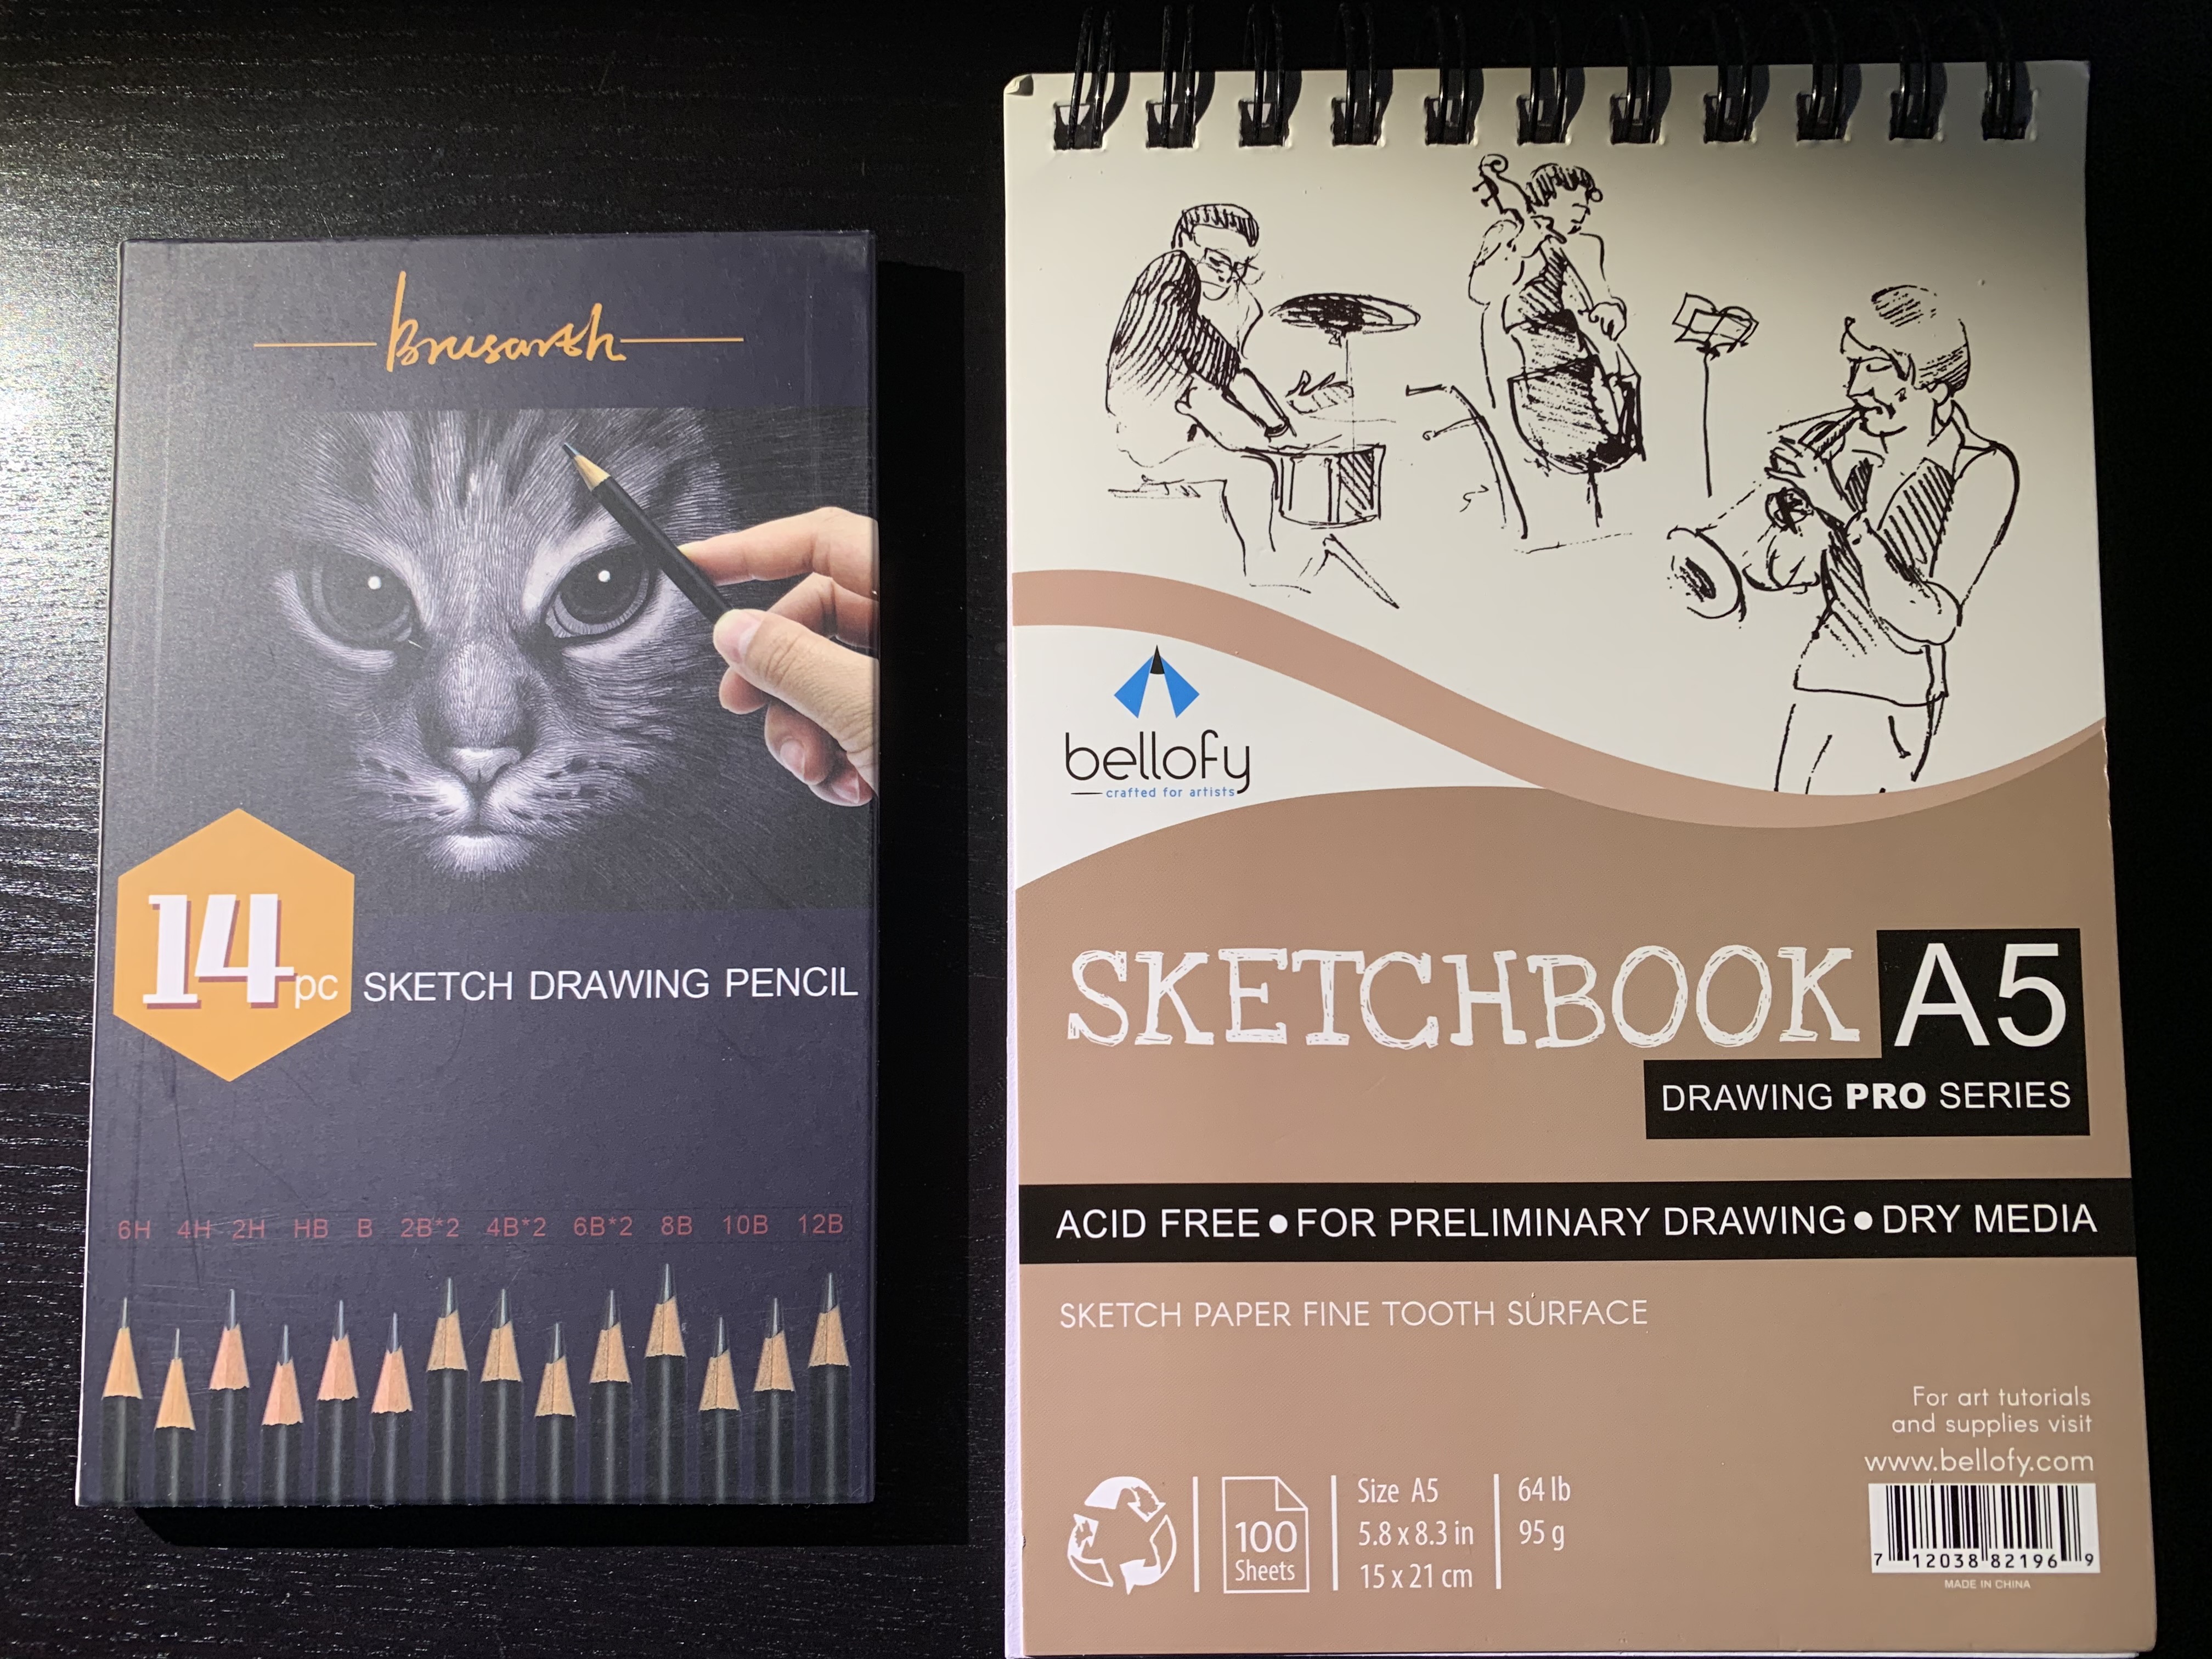 Sketch Book and Drawing Pencils